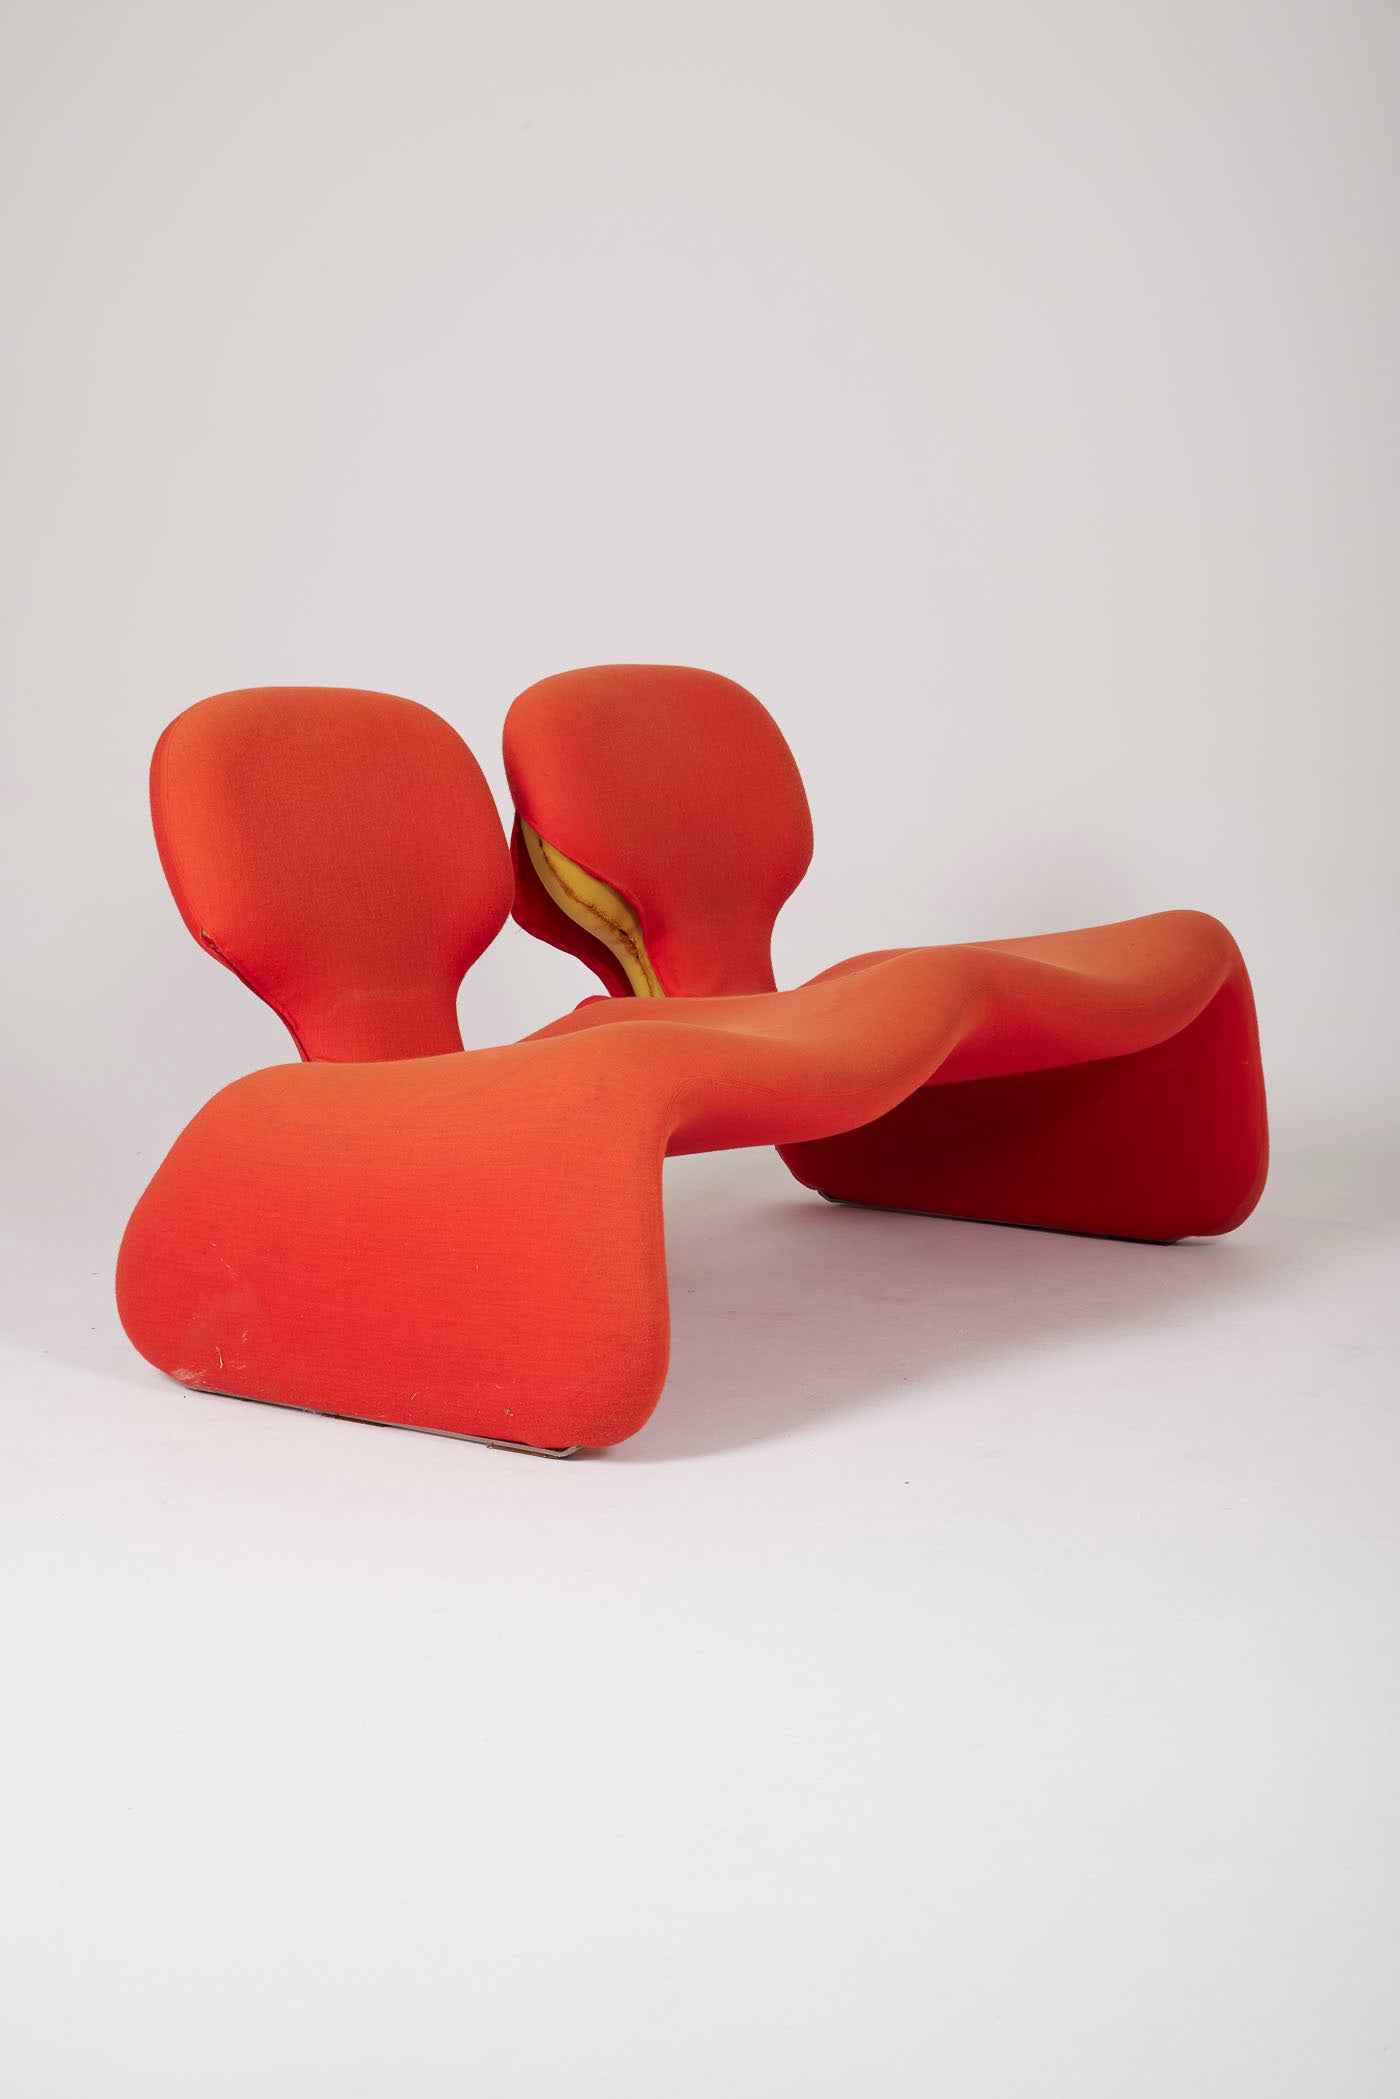 Olivier Mourgue bench 